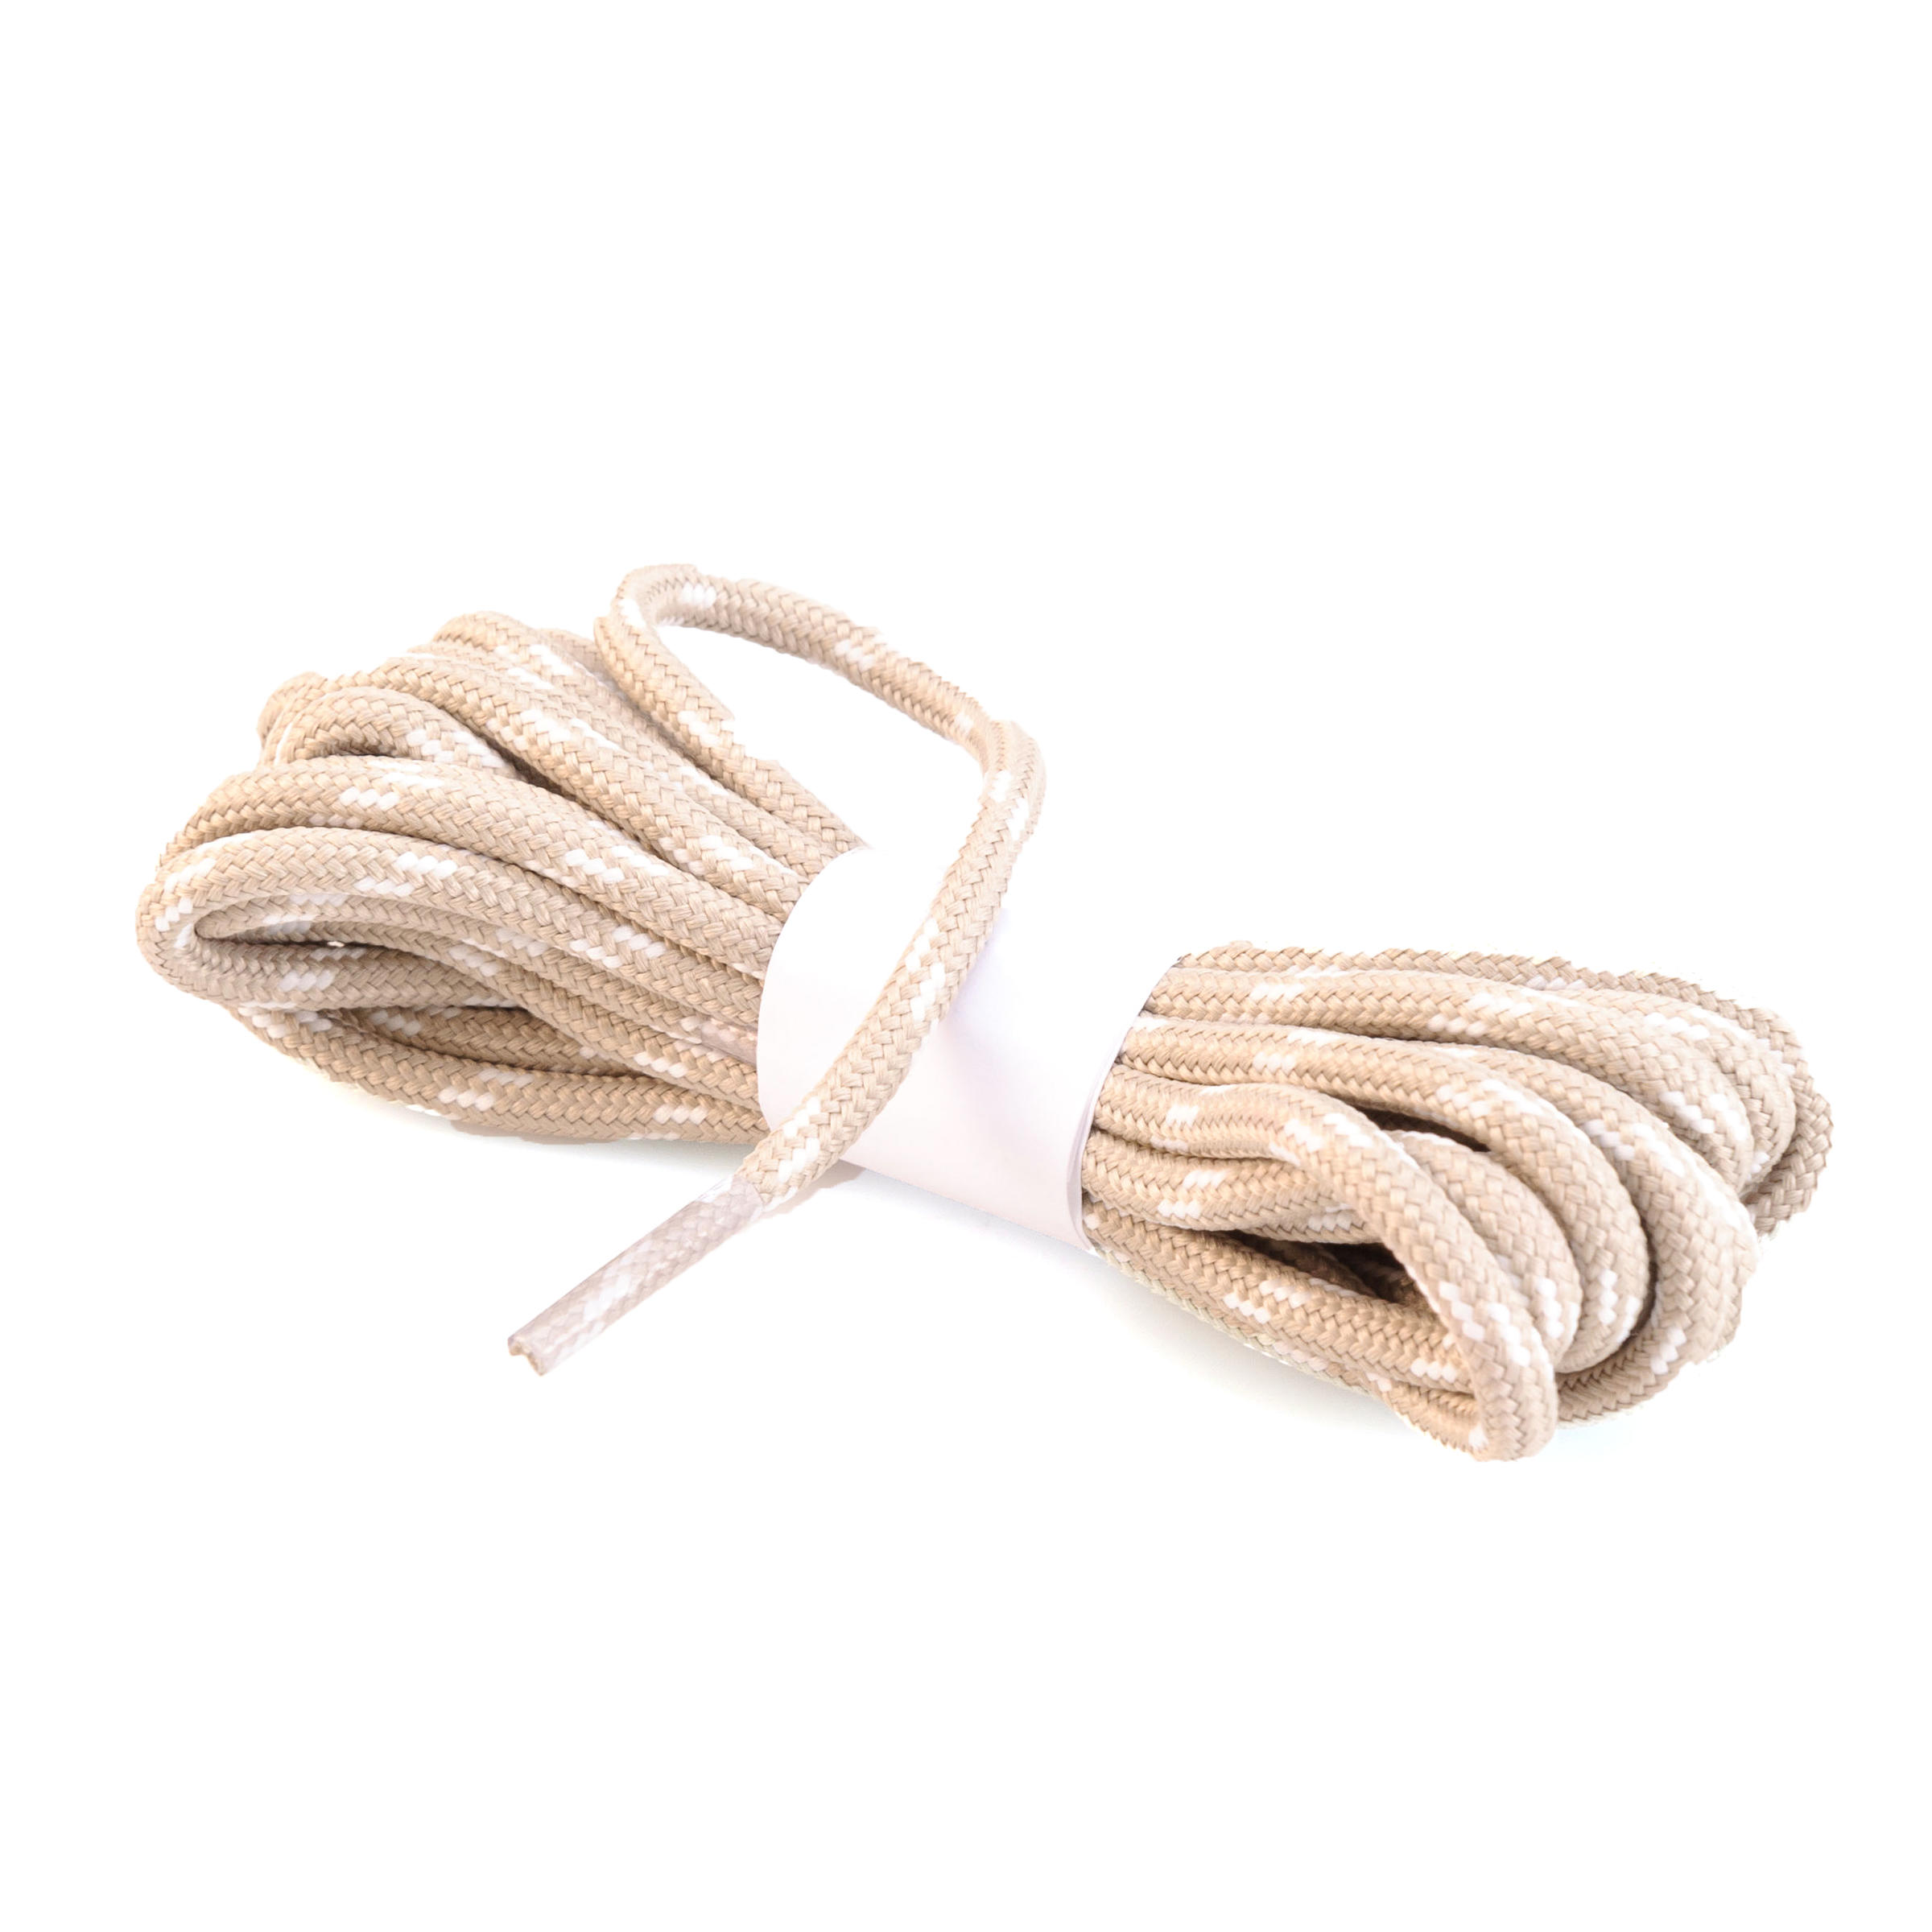 FORCLAZ Round Hiking Boot Laces - Cream